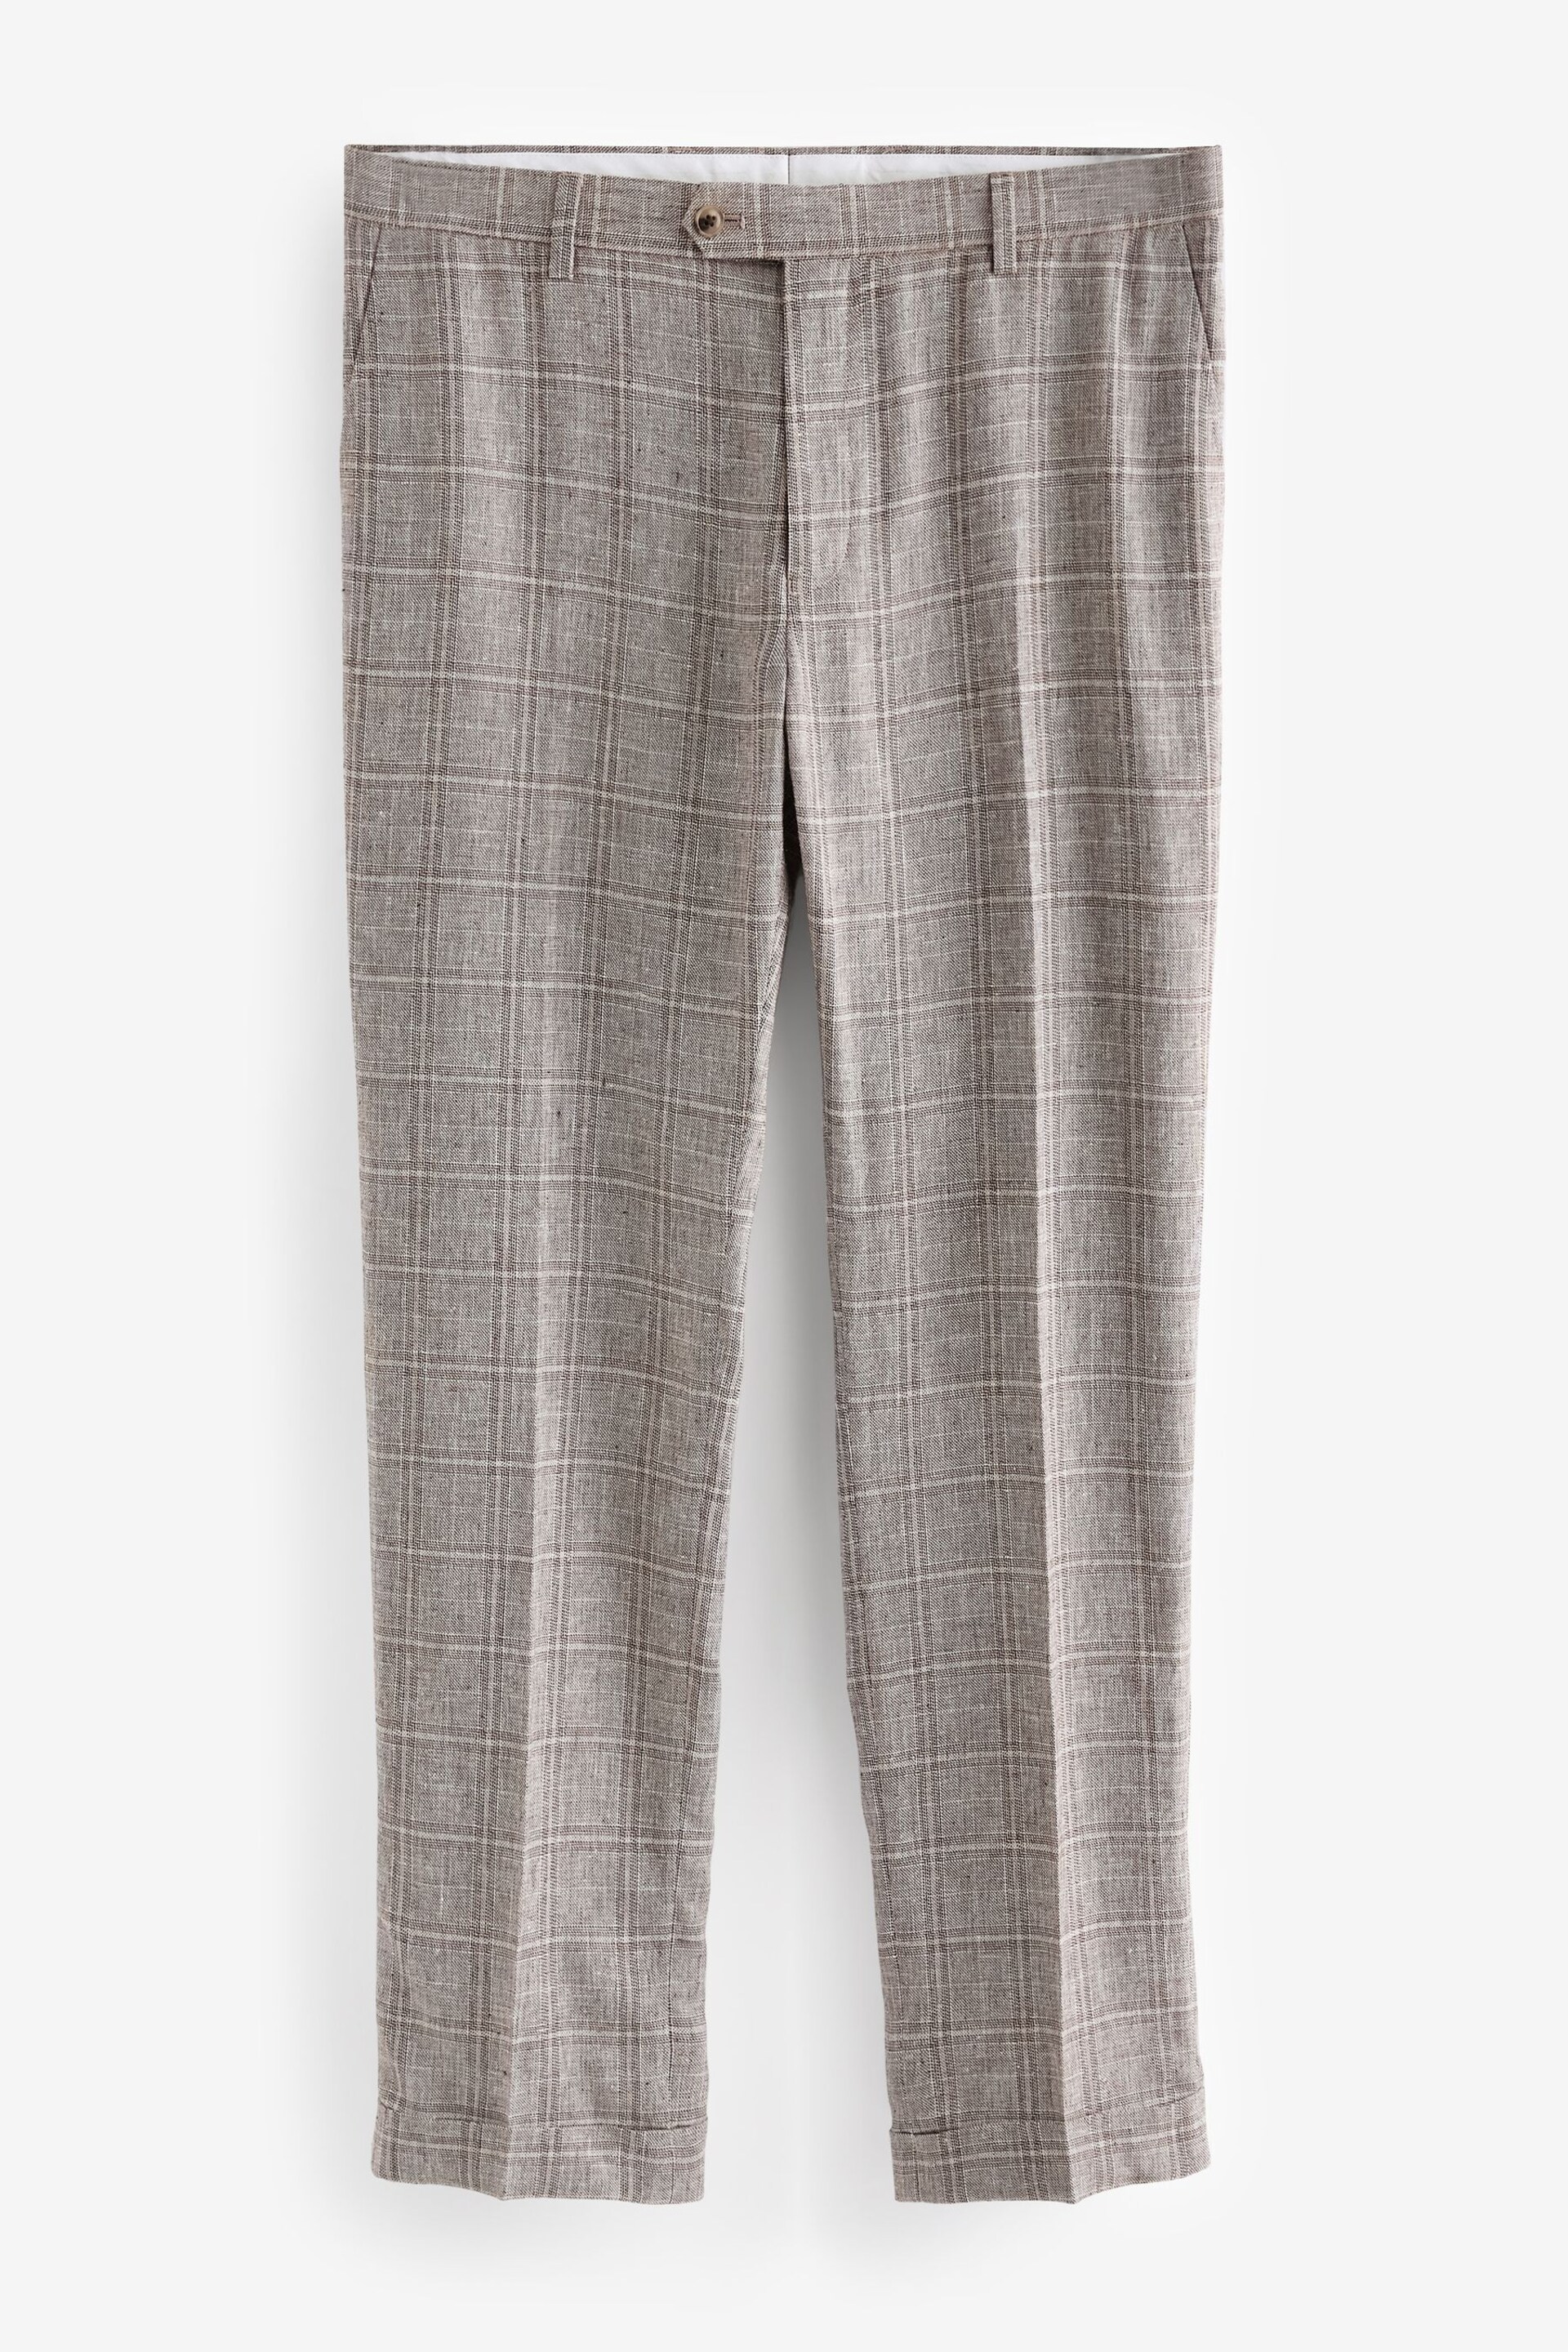 Neutral Tailored Fit Linen Check Suit: Trousers - Image 6 of 9